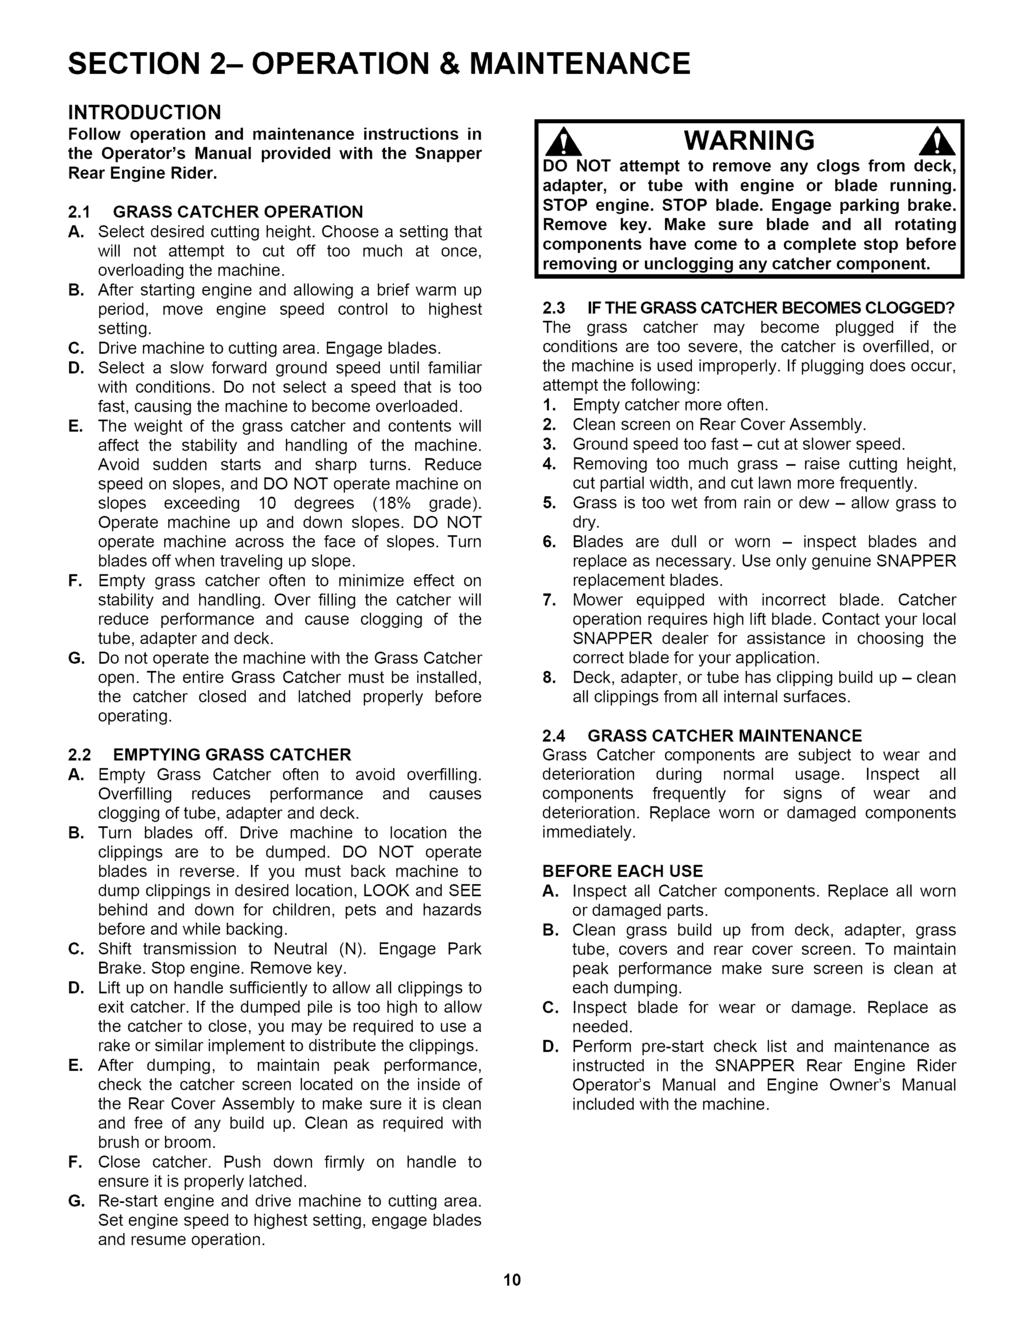 SECTION 2-OPERATION & MAINTENANCE INTRODUCTION Follow operation and maintenance instructions in the Operator's Manual provided with the Snapper Rear Engine Rider. 2.1 GRASS CATCHER OPERATION A.